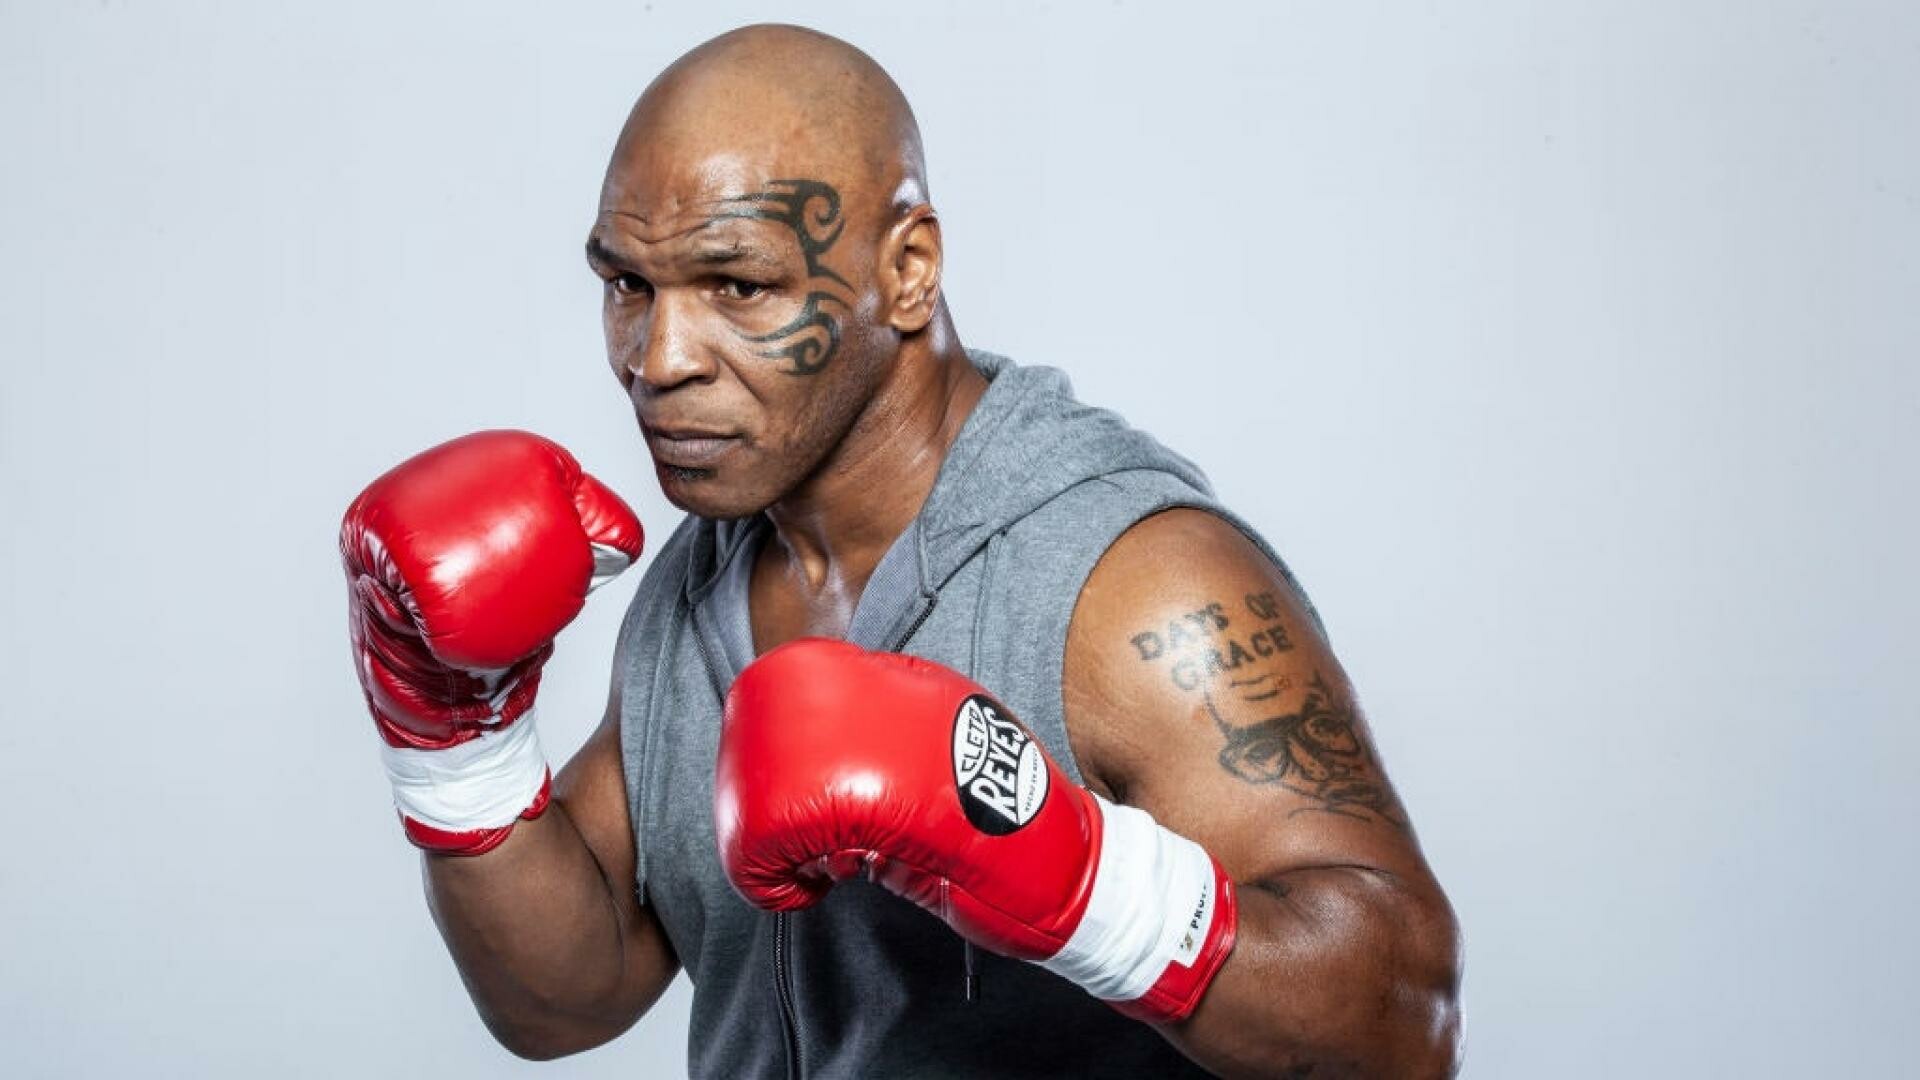 Mike Tyson, New York vibes, Unconventional lifestyle, Enigmatic figure, 1920x1080 Full HD Desktop